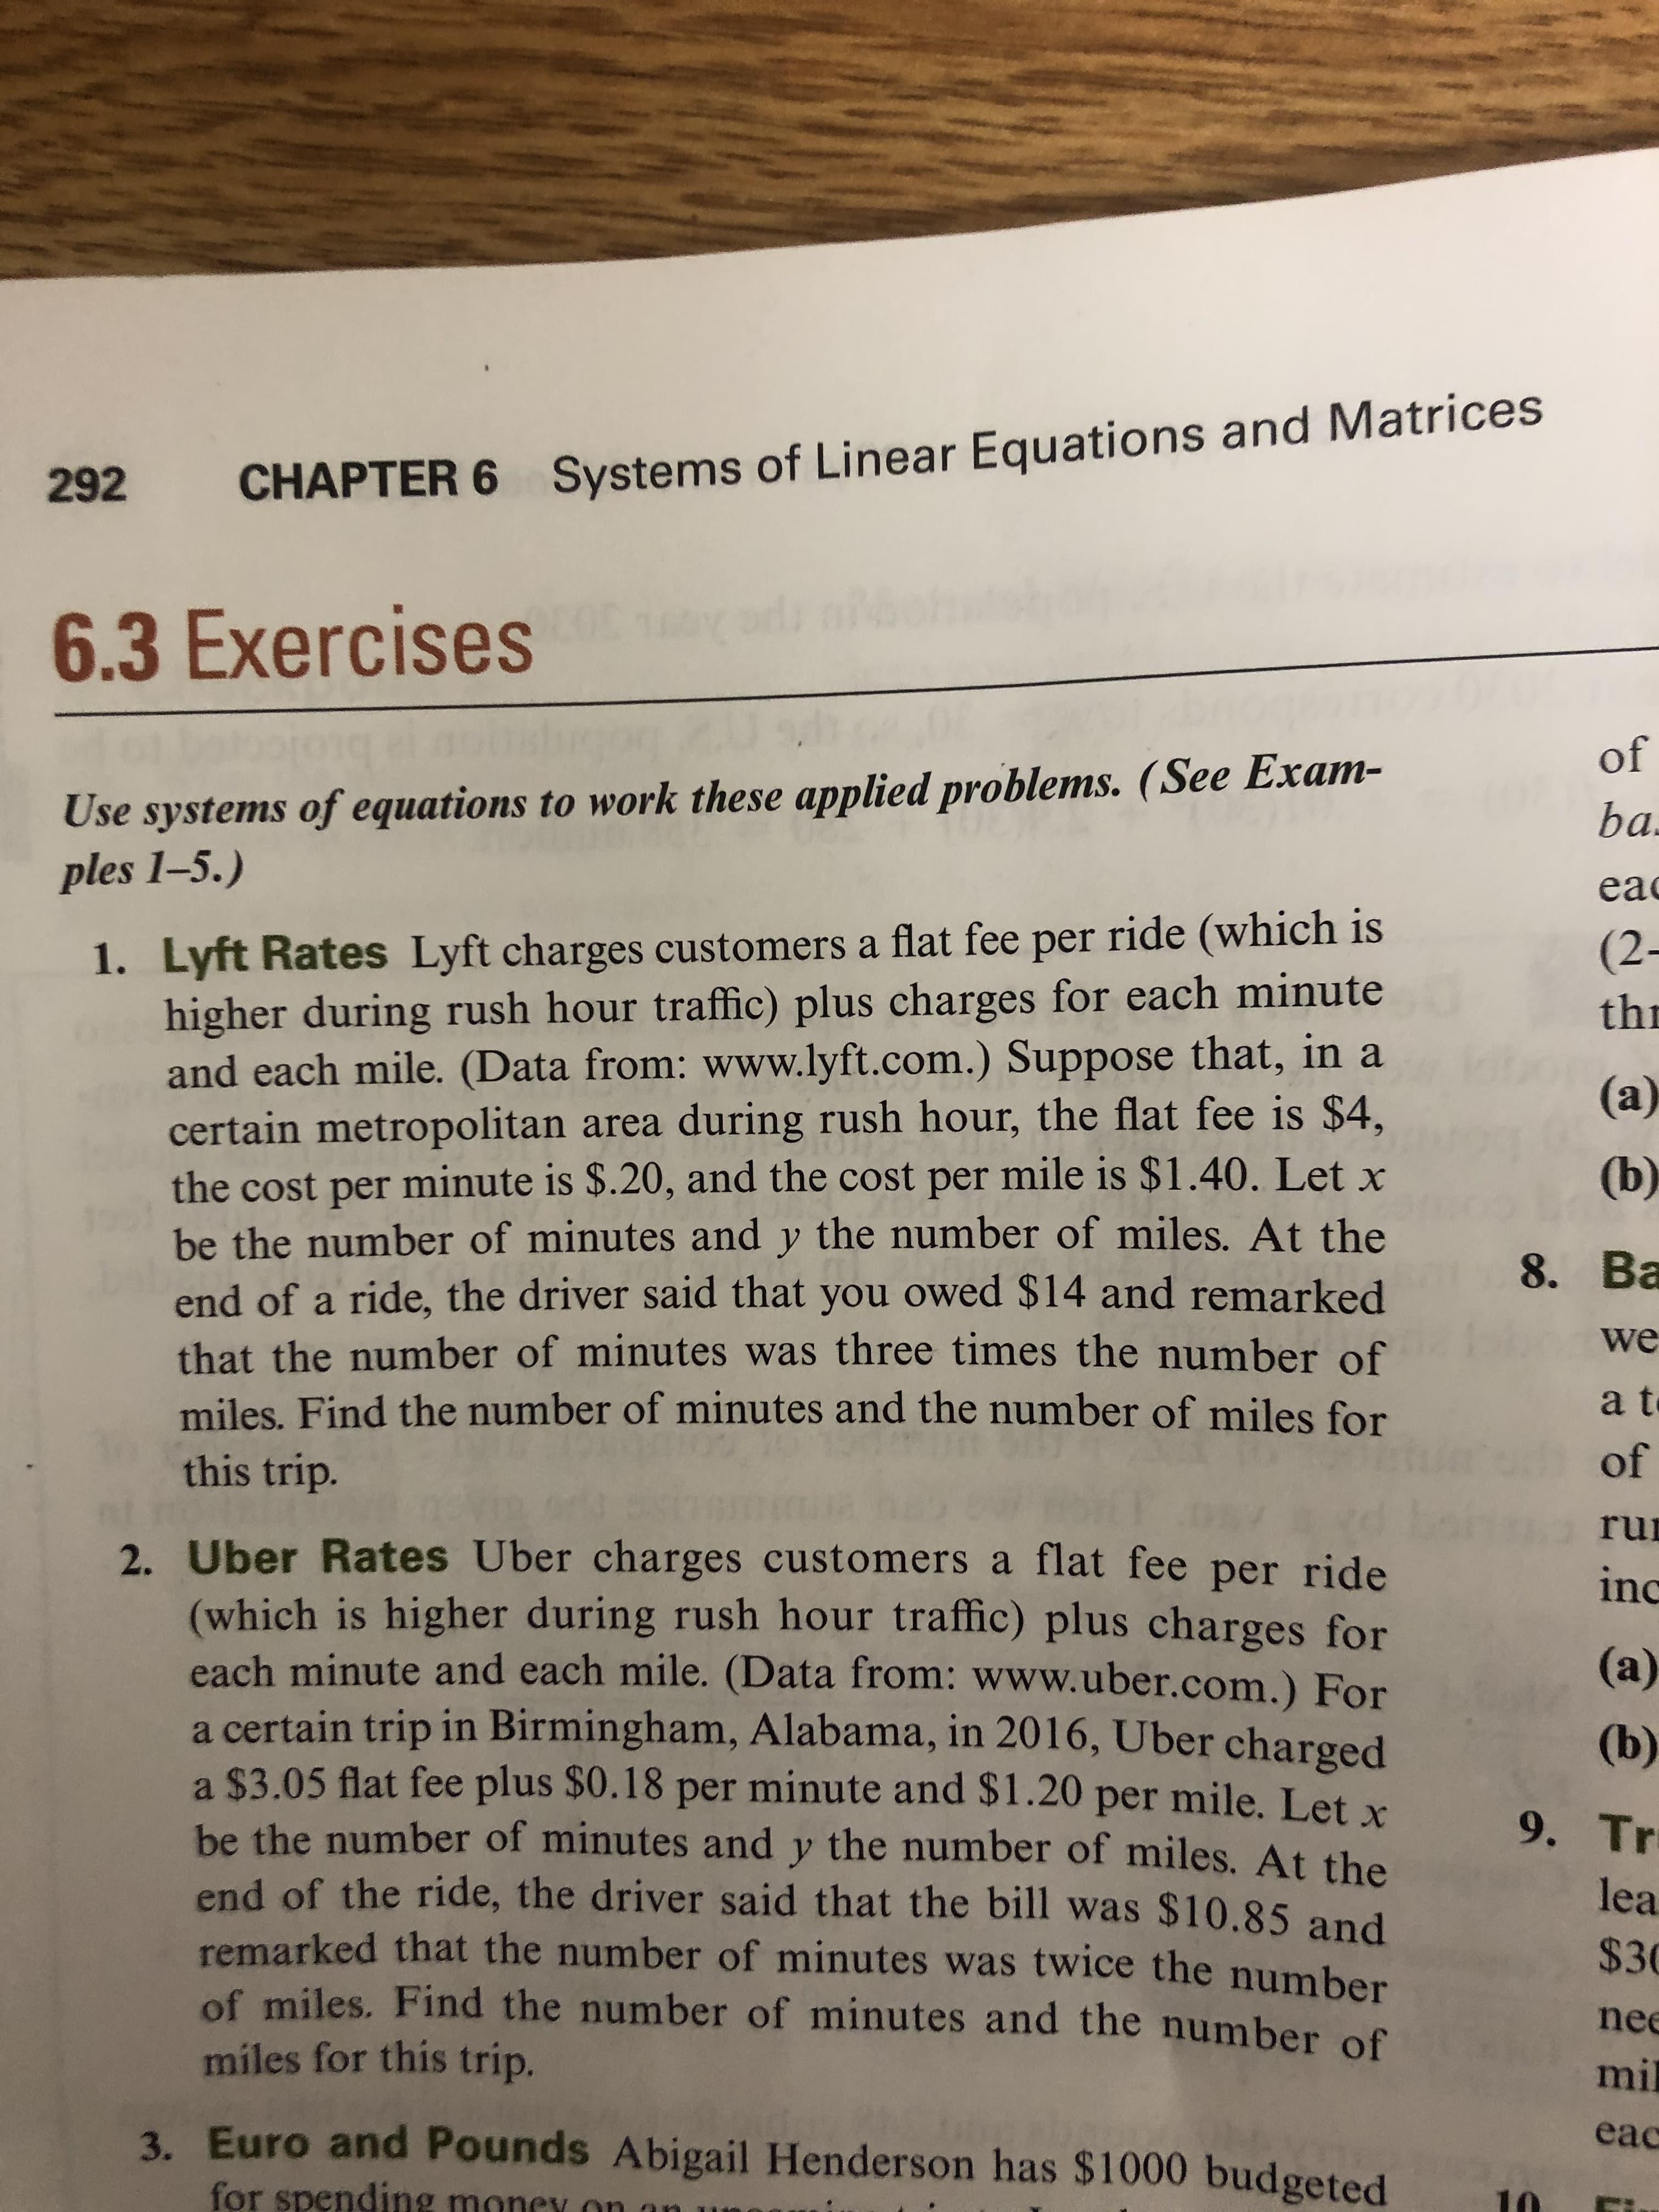 Systems of Linear Equations and Matrices
292
CHAPTER 6
6.3 Exercises
of
Use systems of equations to work these applied problems. (See Exam-
ples 1-5.)
ba
ea
1. Lyft Rates Lyft charges customers a flat fee per ride (which is
higher during rush hour traffic) plus charges for each minute
and each mile. (Data from: www.lyft.com.) Suppose that, in a
certain metropolitan area during rush hour, the flat fee is $4,
the cost per minute is $.20, and the cost per mile is $1.40. Let
be the number of minutes and y the number of miles. At the
end of a ride, the driver said that you owed $14 and remarked
that the number of minutes was three times the number of
miles. Find the number of minutes and the number of miles for
this trip.
(2-
th
(а)
(b)
8. Ва
we
a t
of
ru
inc
2. Uber Rates Uber charges customers a flat fee per ride
(which is higher during rush hour traffic) plus charges for
each minute and each mile. (Data from: www.uber.com.) For
a certain trip in Birmingham, Alabama, in 2016, Uber charged
a $3.05 flat fee plus $0.18 per minute and $1.20 per mile. Let x
be the number of minutes and y the number of miles. At the
end of the ride, the driver said that the bill was $10.85 and
remarked that the number of minutes was twice the number
of miles. Find the number of minutes and the number of
miles for this trip.
(a)
(b)
9. Tr
lea
$30
nee
mil
3. Euro and Pounds Abigail Henderson has $1000 budgeted
eac
for spending money on
